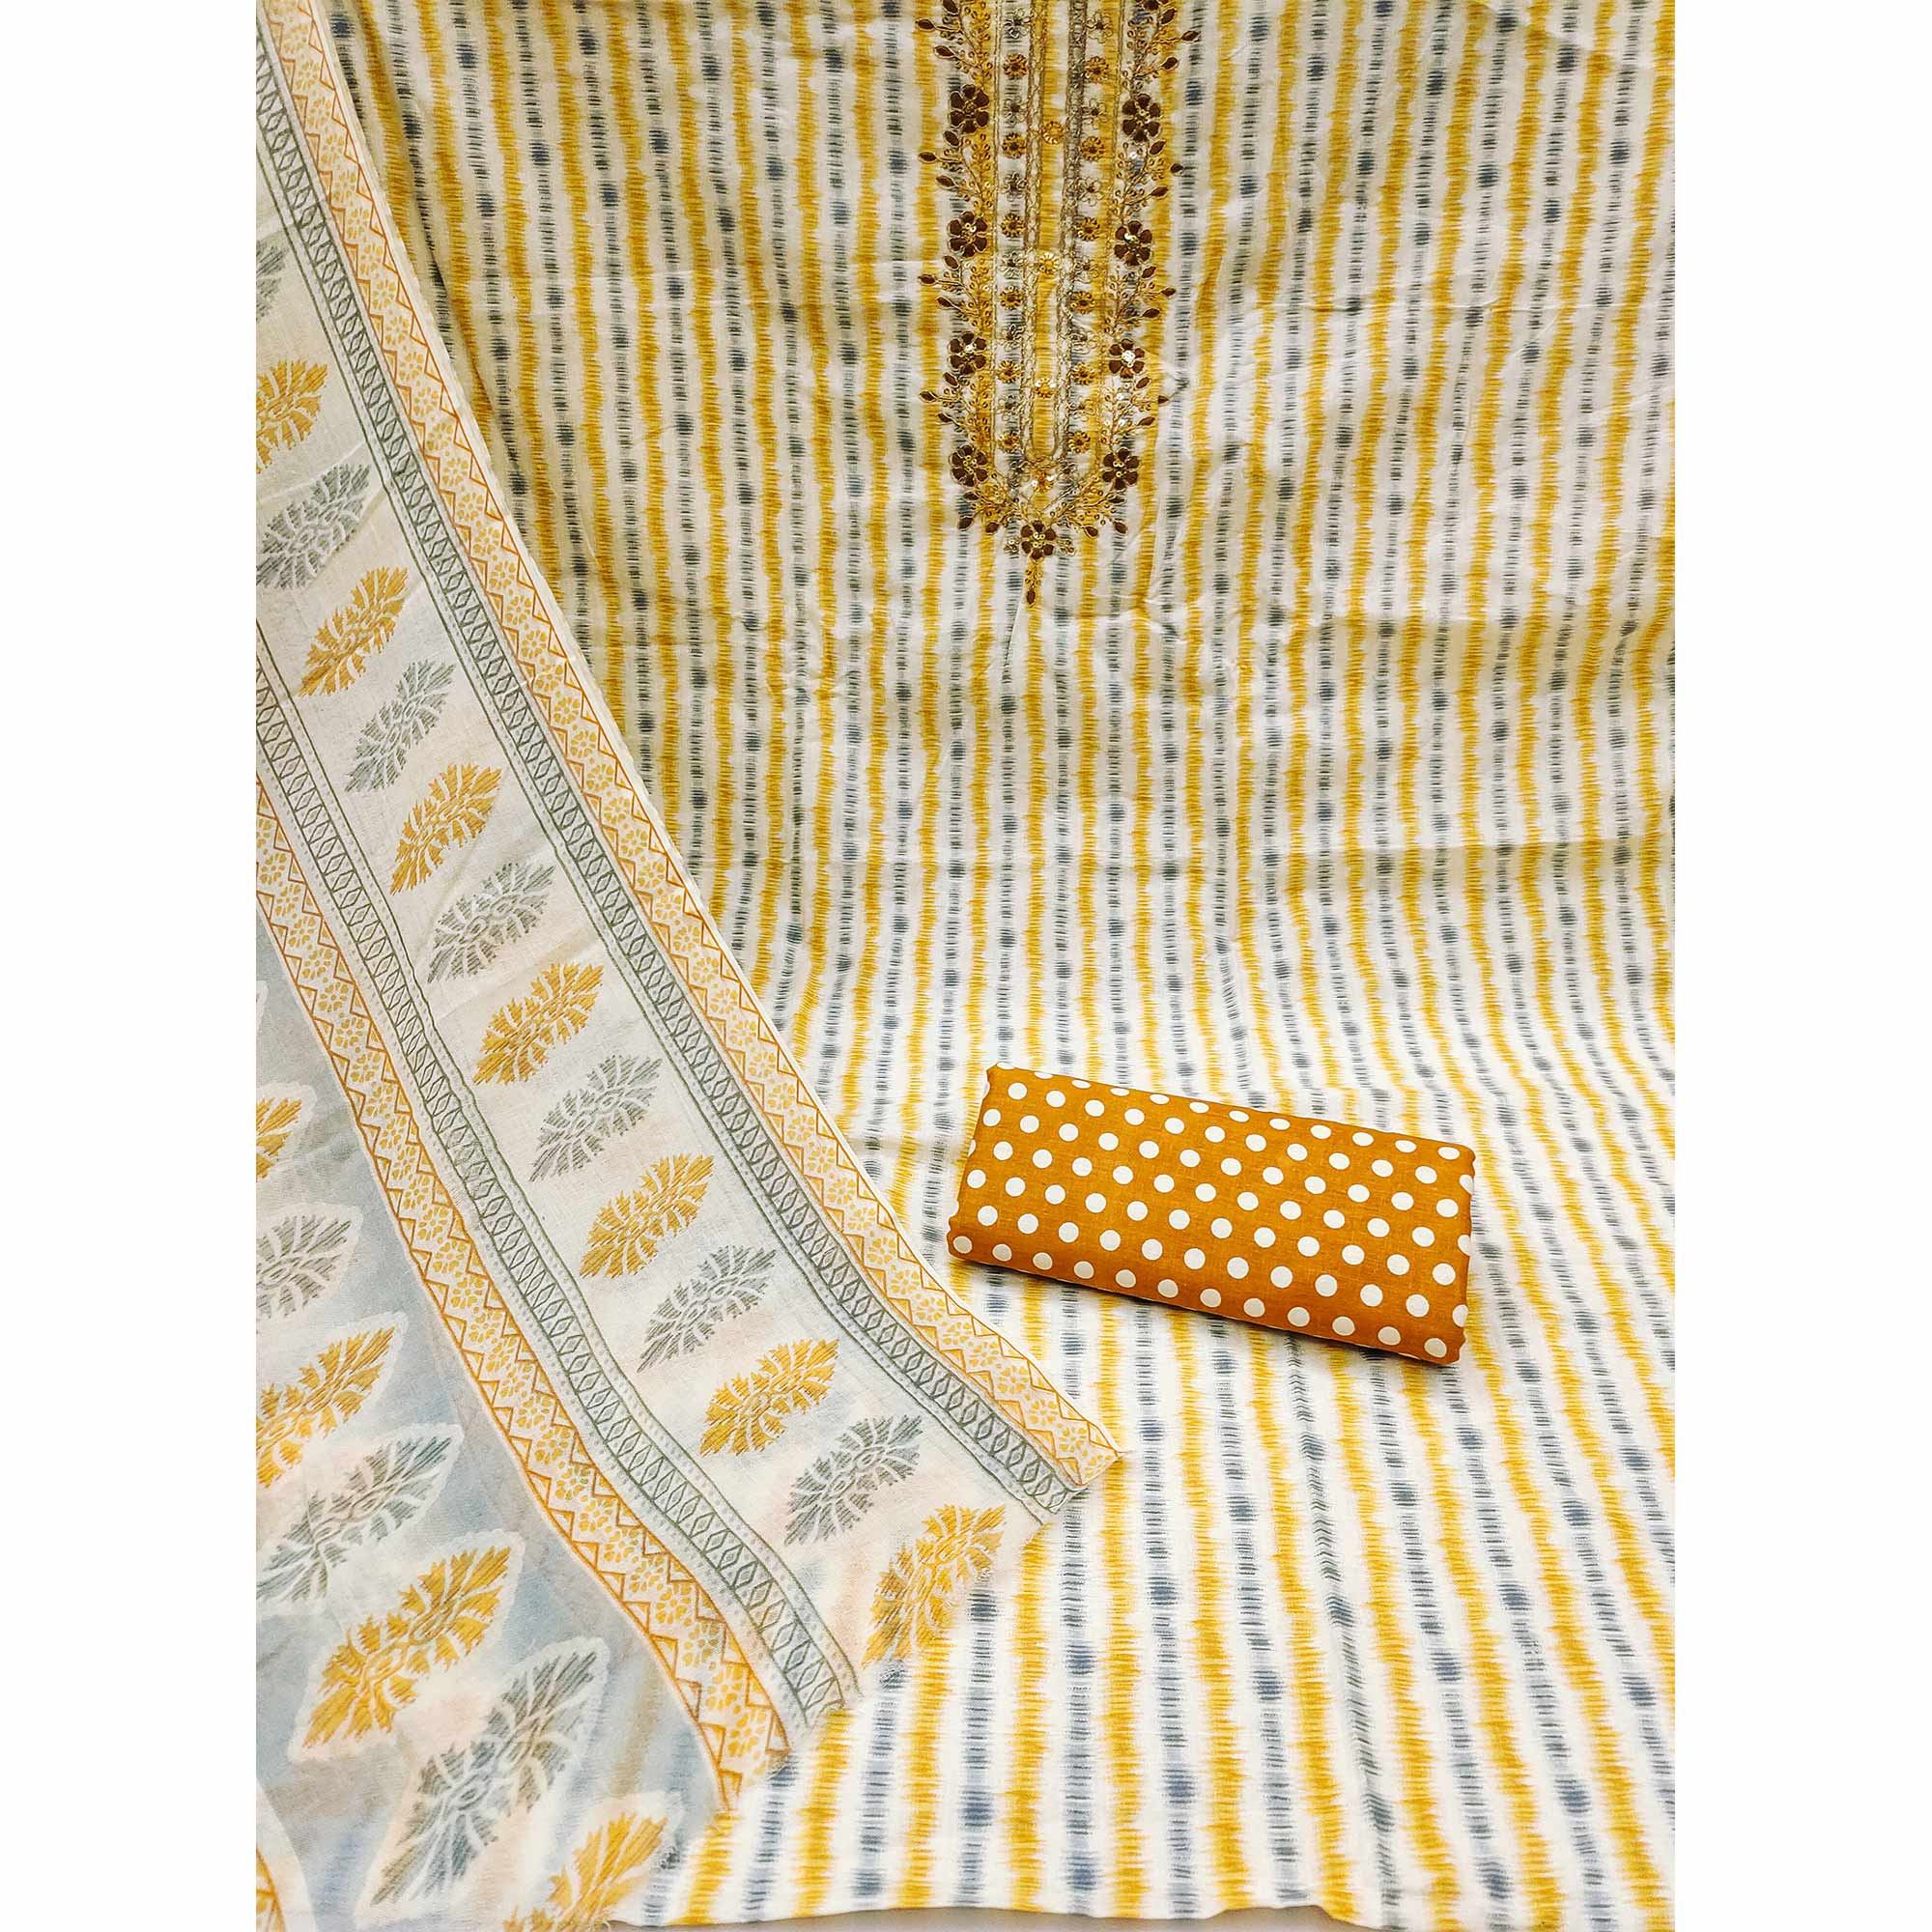 White & Mustard Striped Printed Pure Cotton Dress Material